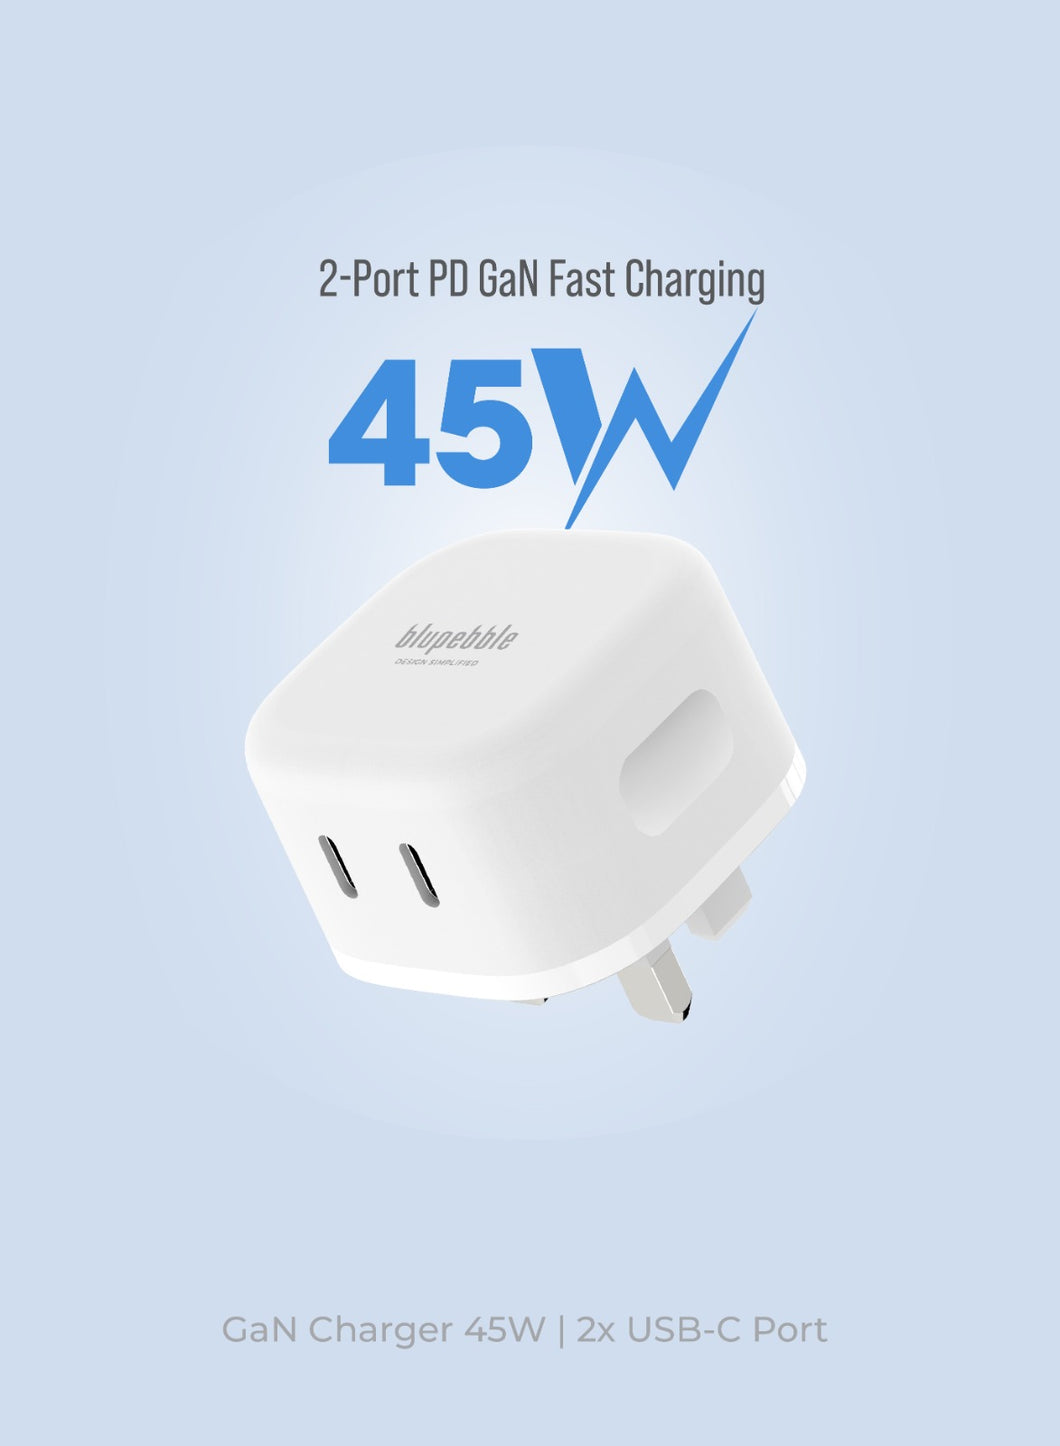 Blupebble 2port PD Gan Fast Charger (45watts)- White